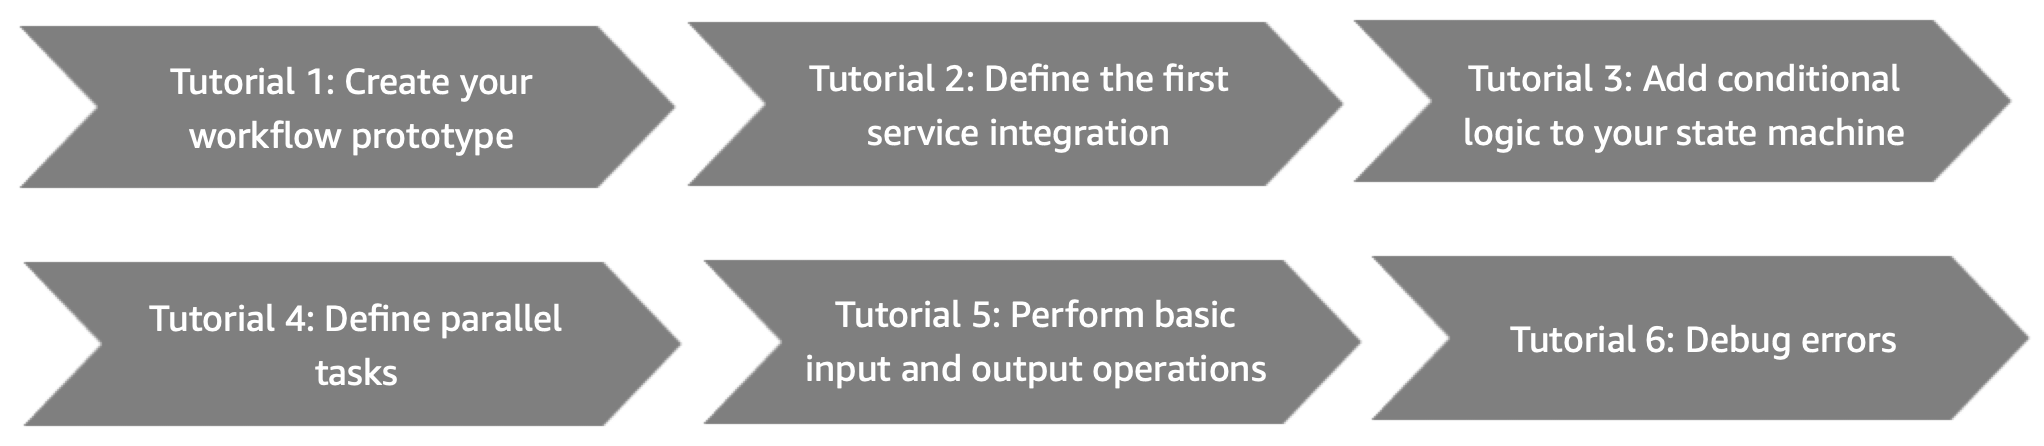 A roadmap of the tutorials in this Getting Started tutorials series.